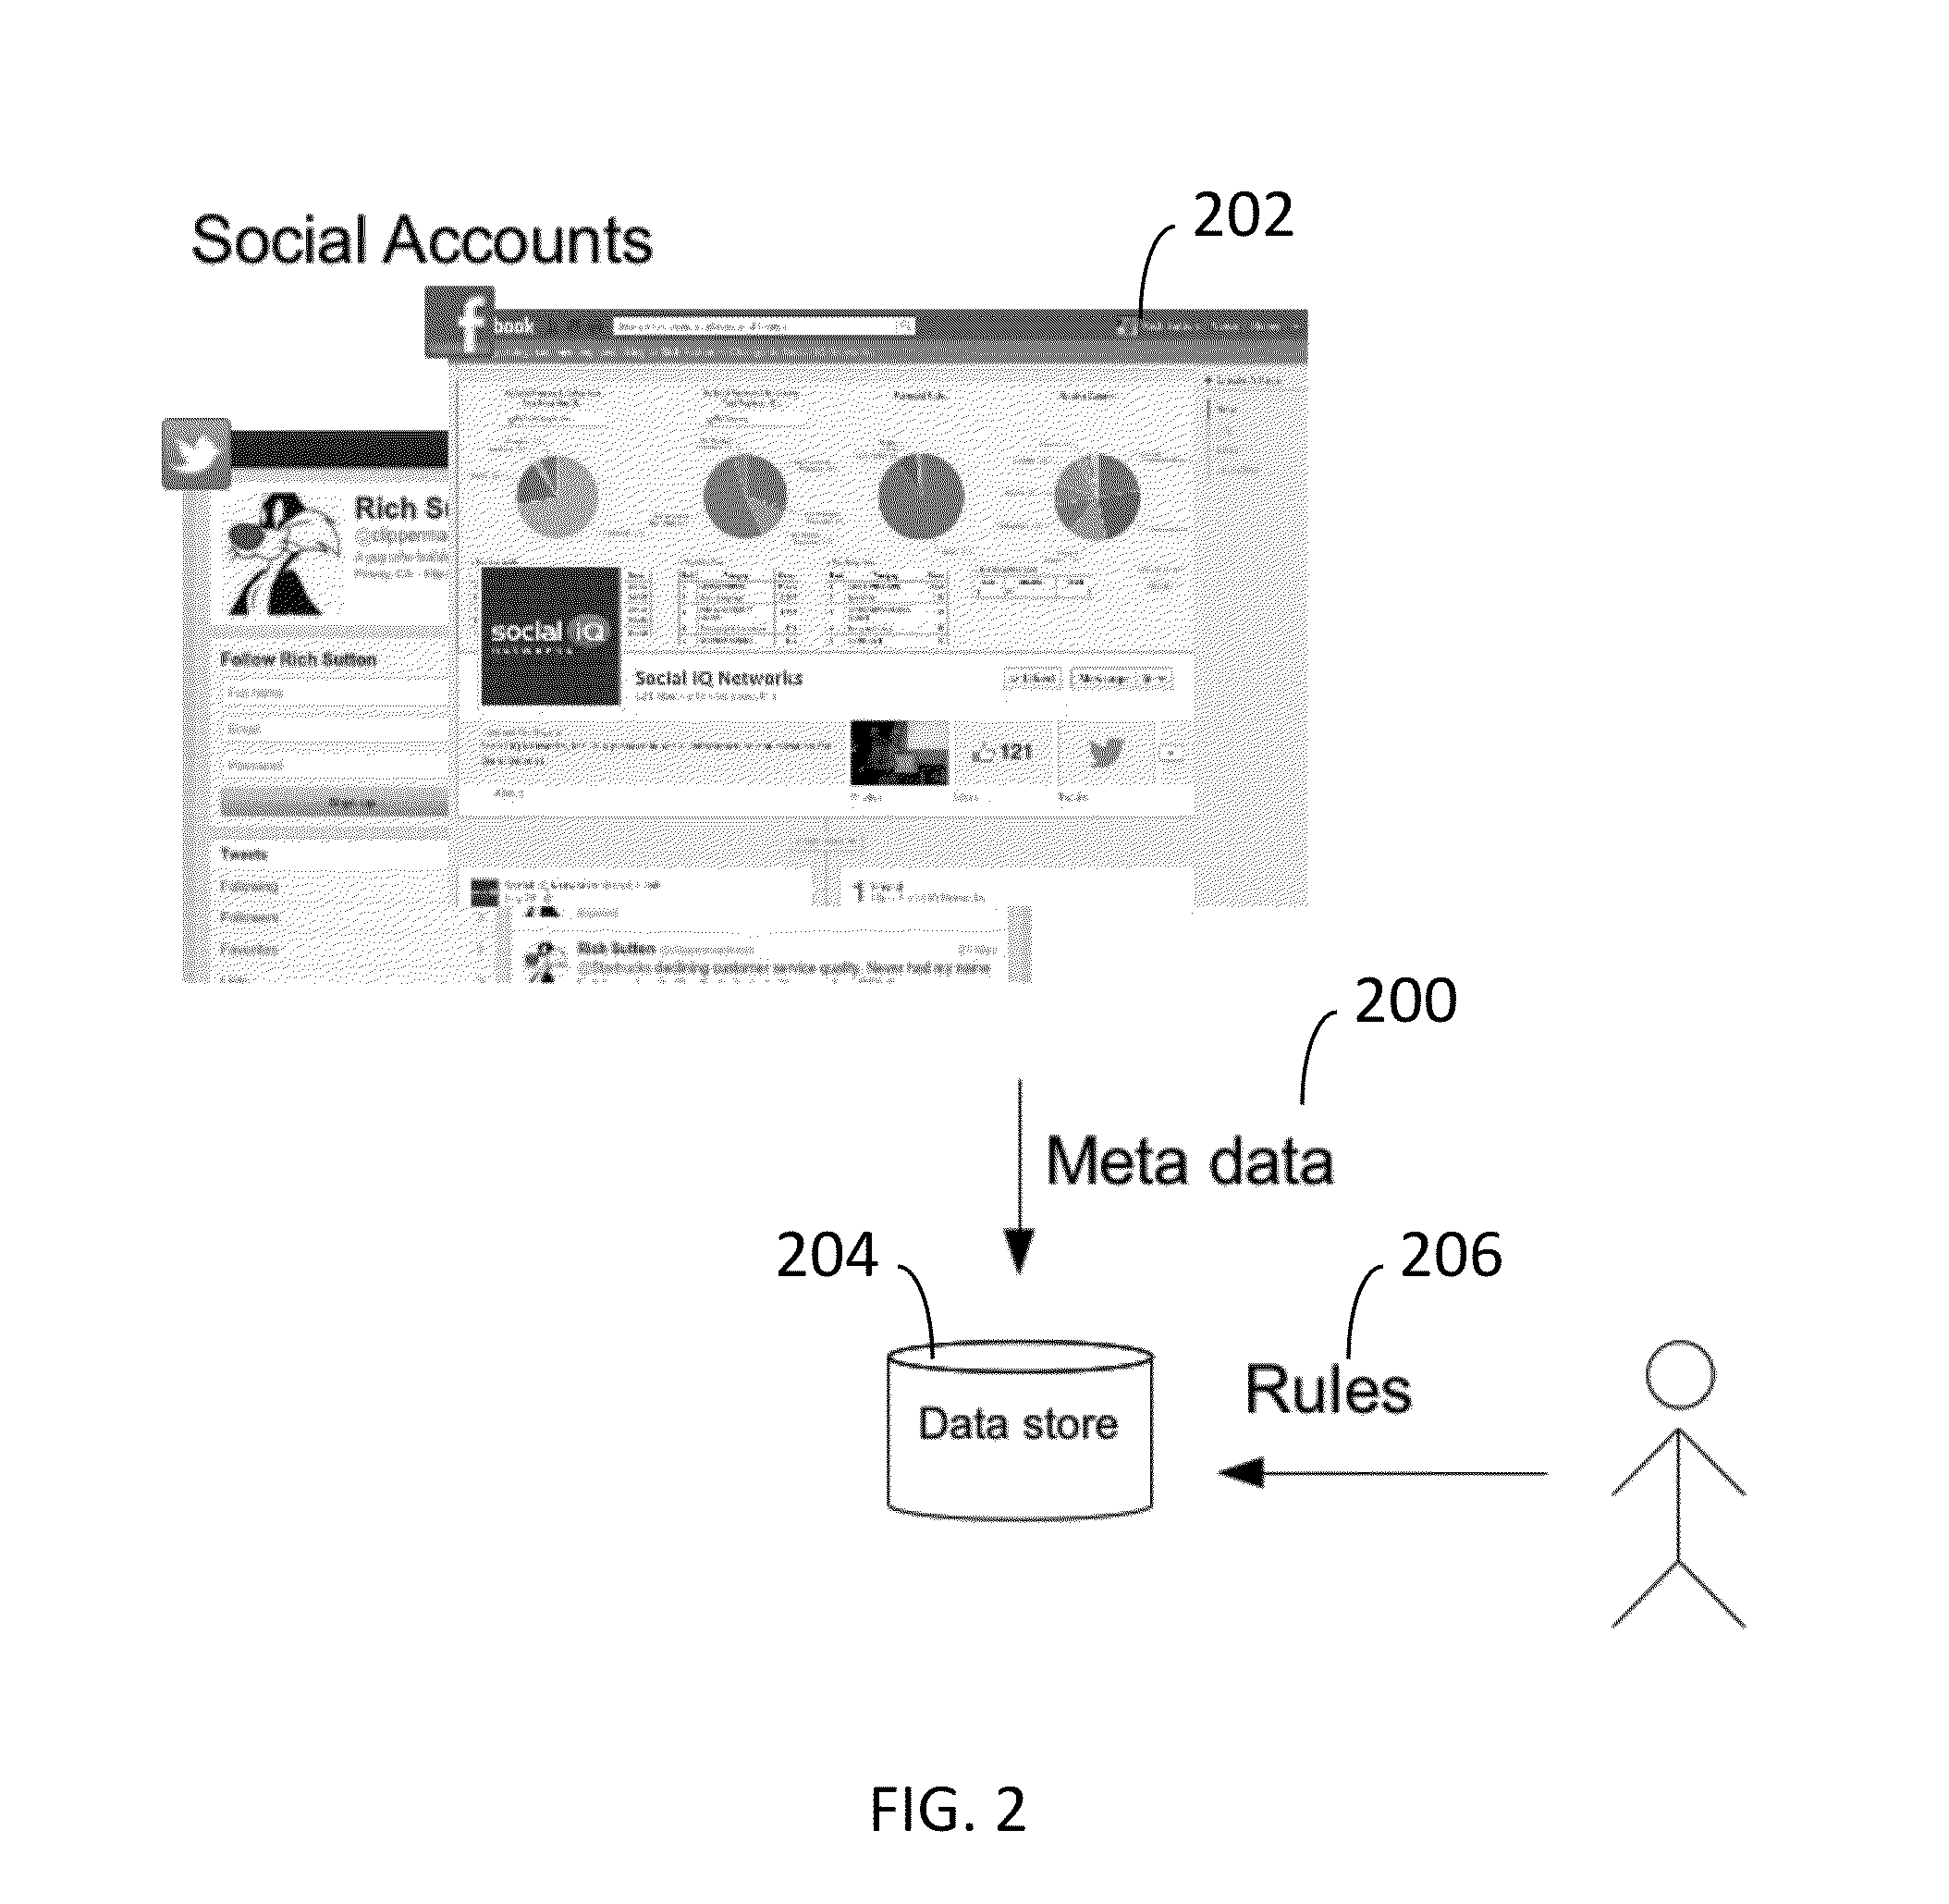 Apparatus and Method for Social Account Access Control